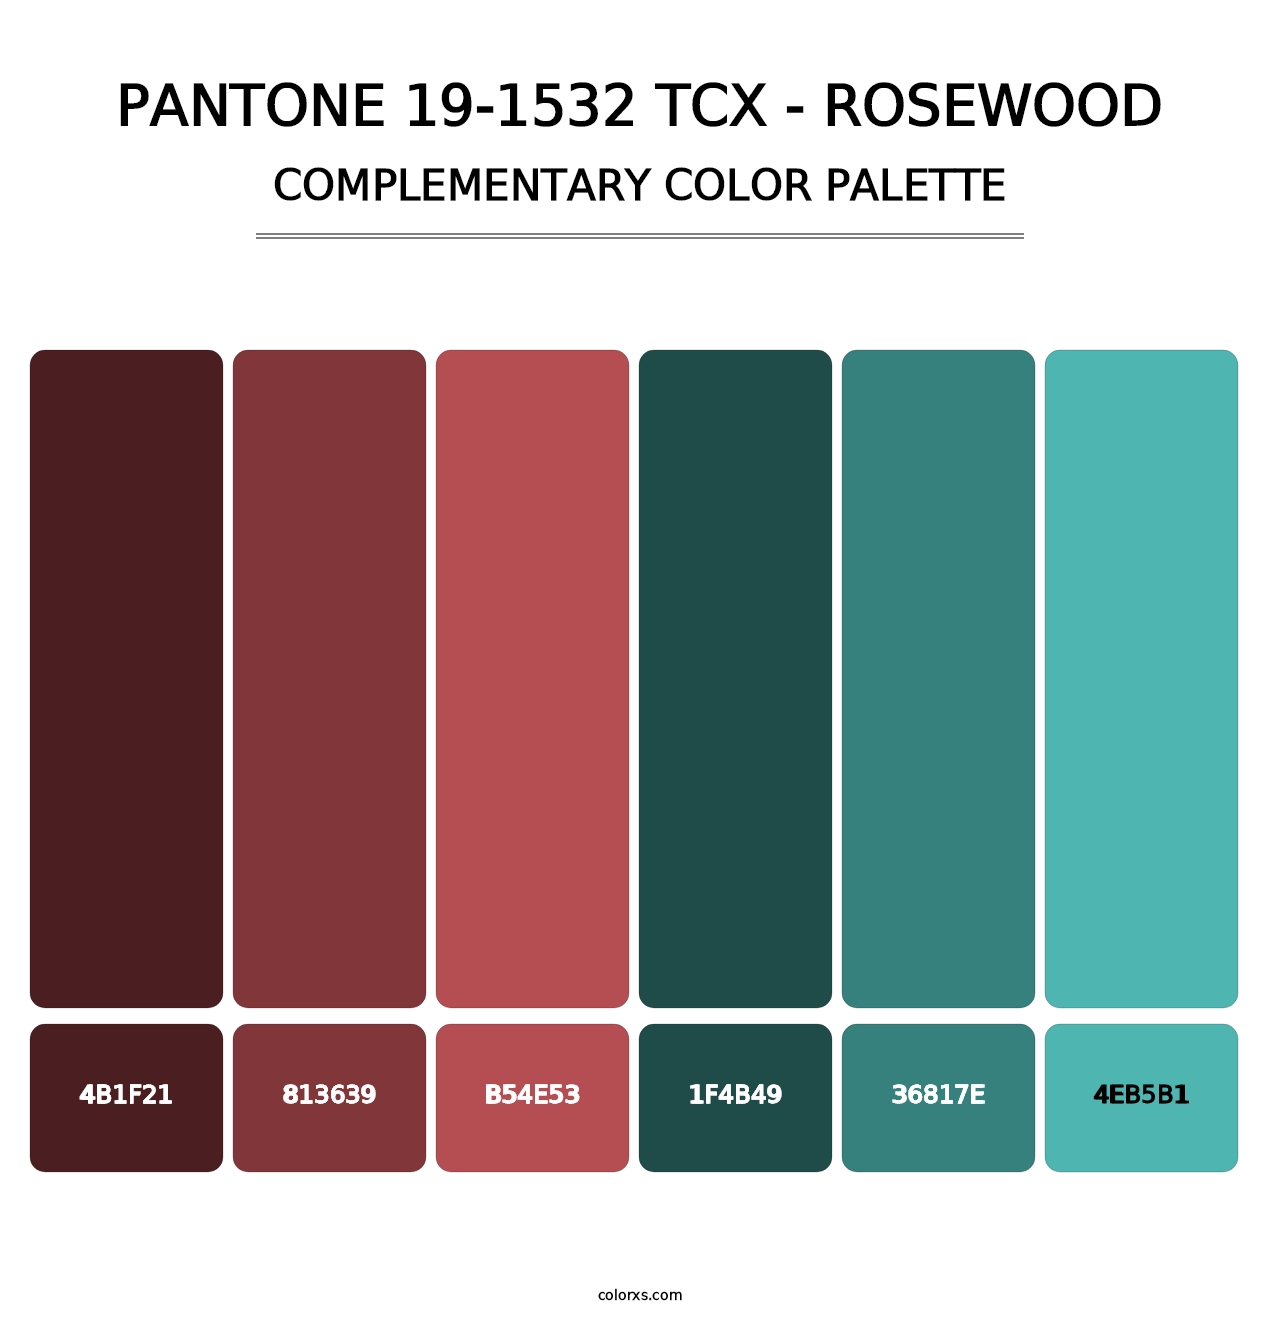 PANTONE 19-1532 TCX - Rosewood - Complementary Color Palette